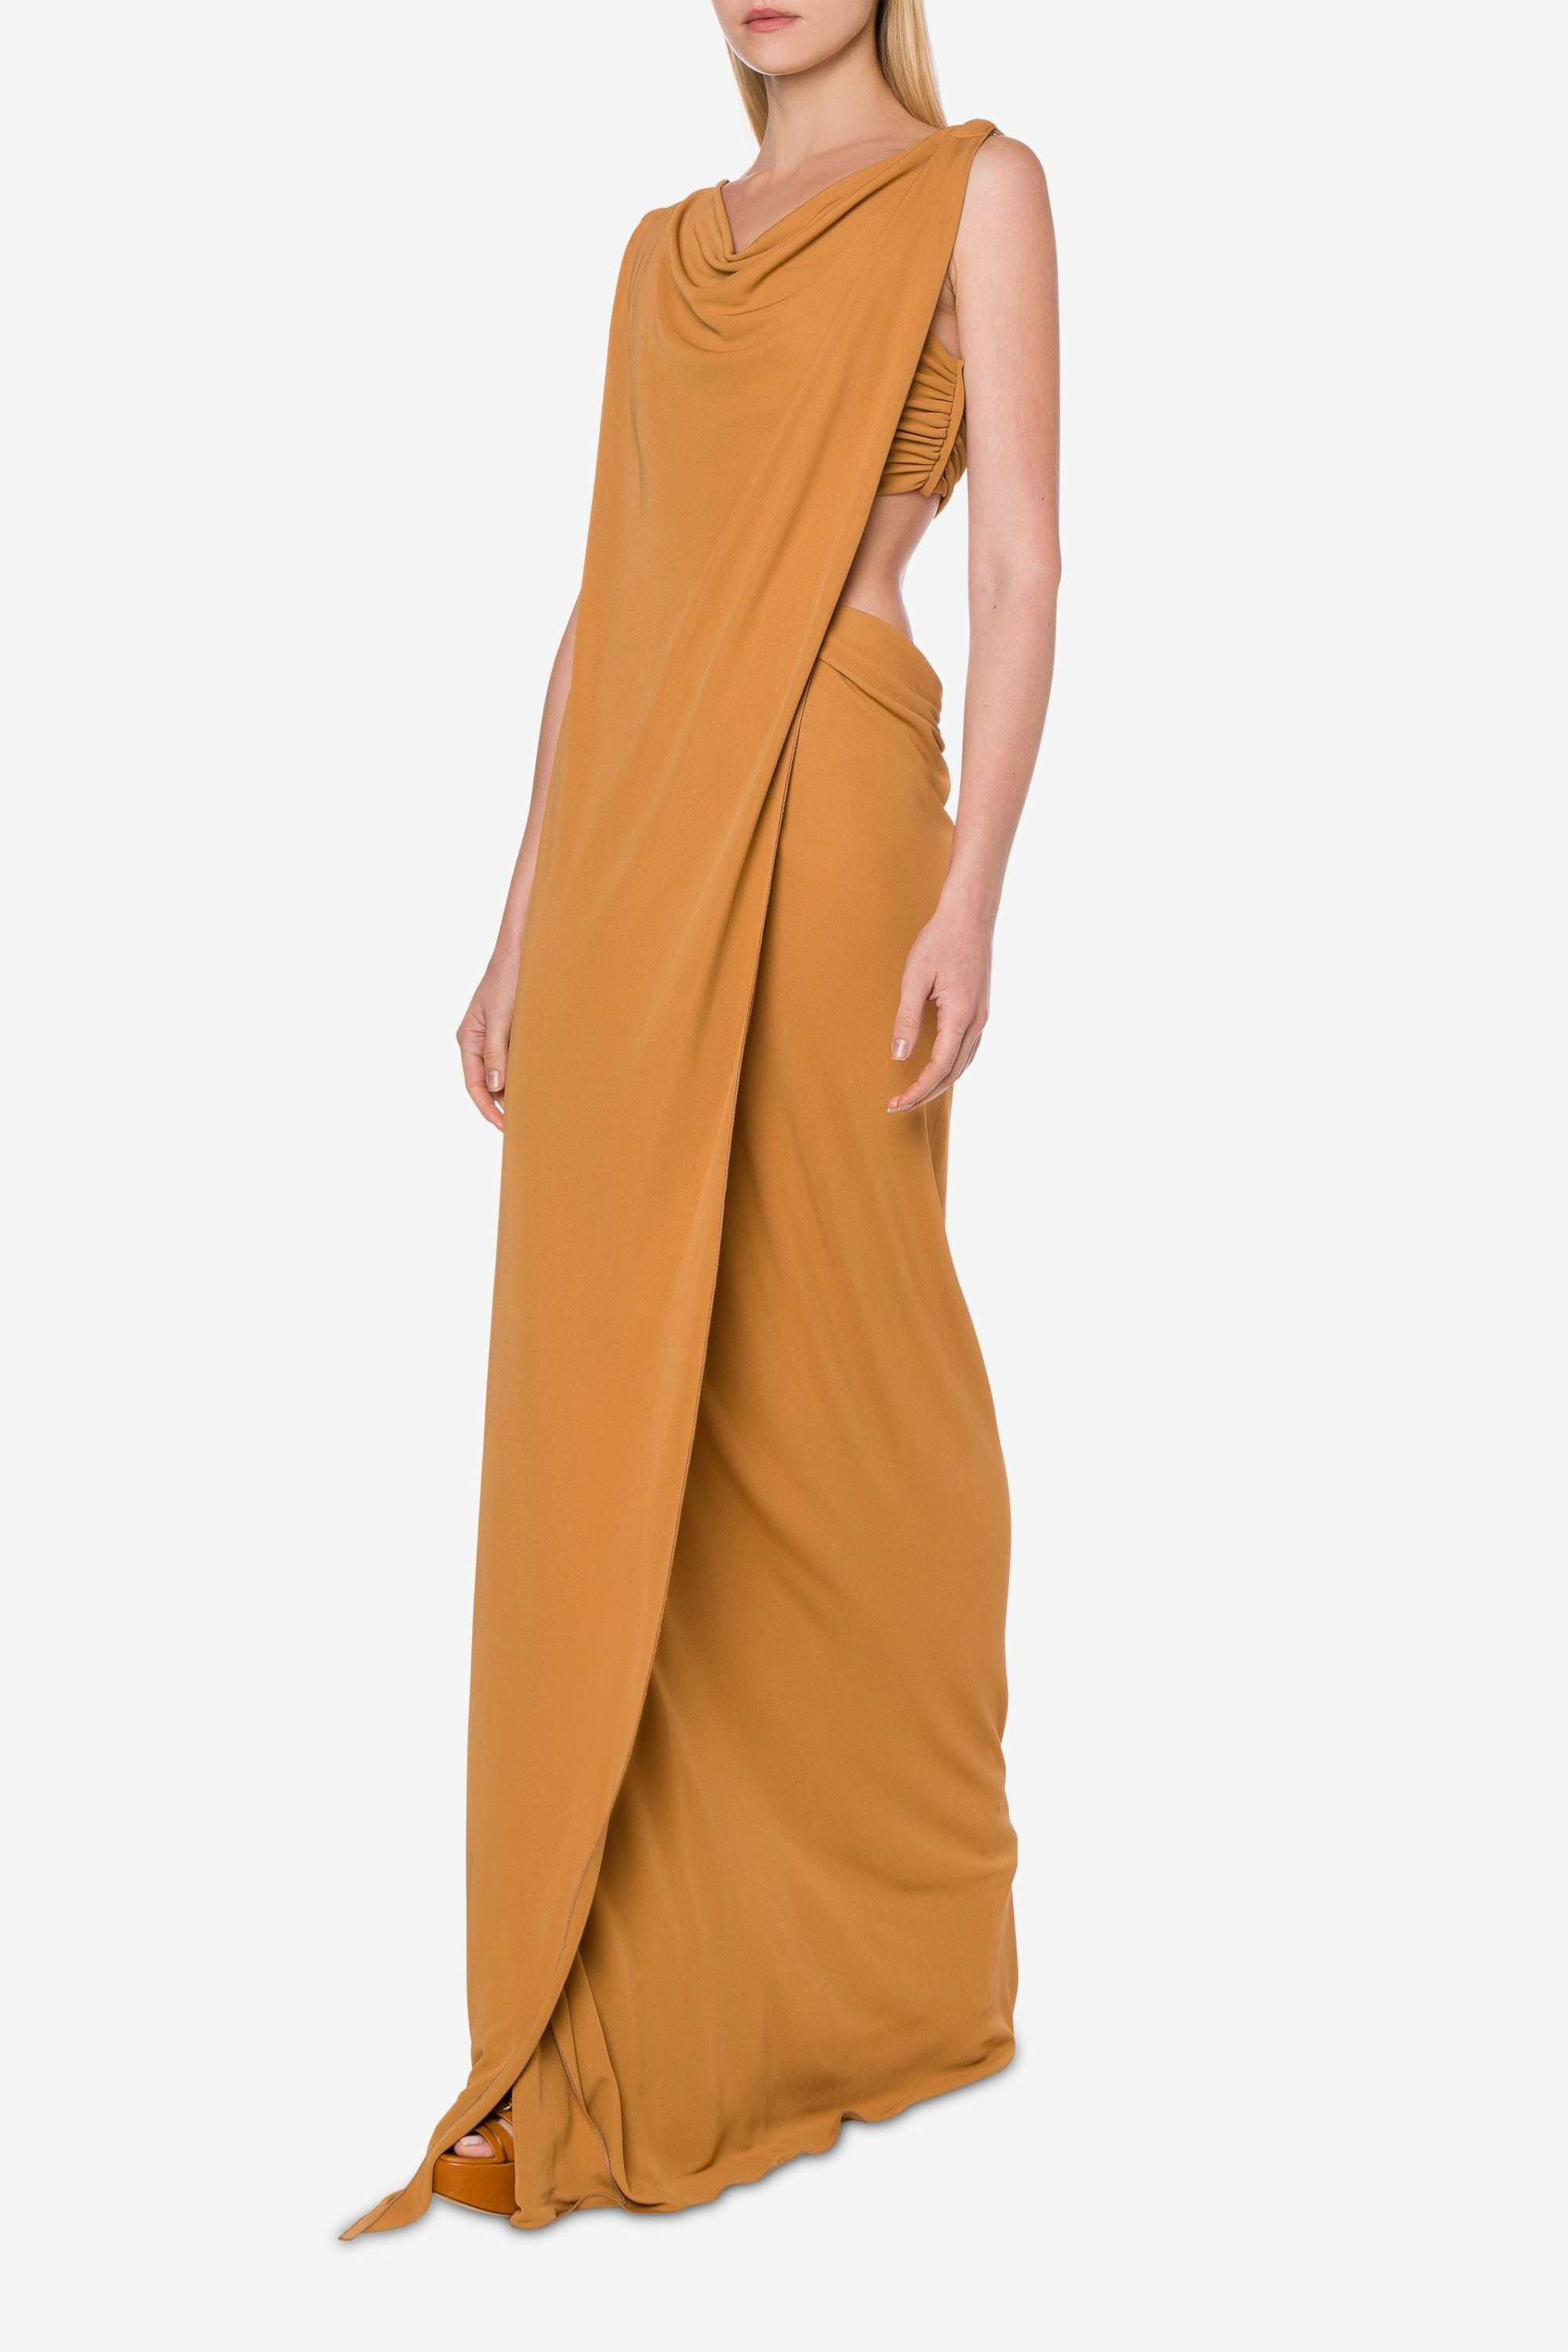 Eco-Sustainable Dress by Alberta Ferretti, 100% Viscose, Colour: Ocher, Features a drape neckline, side zippered corset and long hem. SS23 Collection, New Arrivals at Espace Cannelle